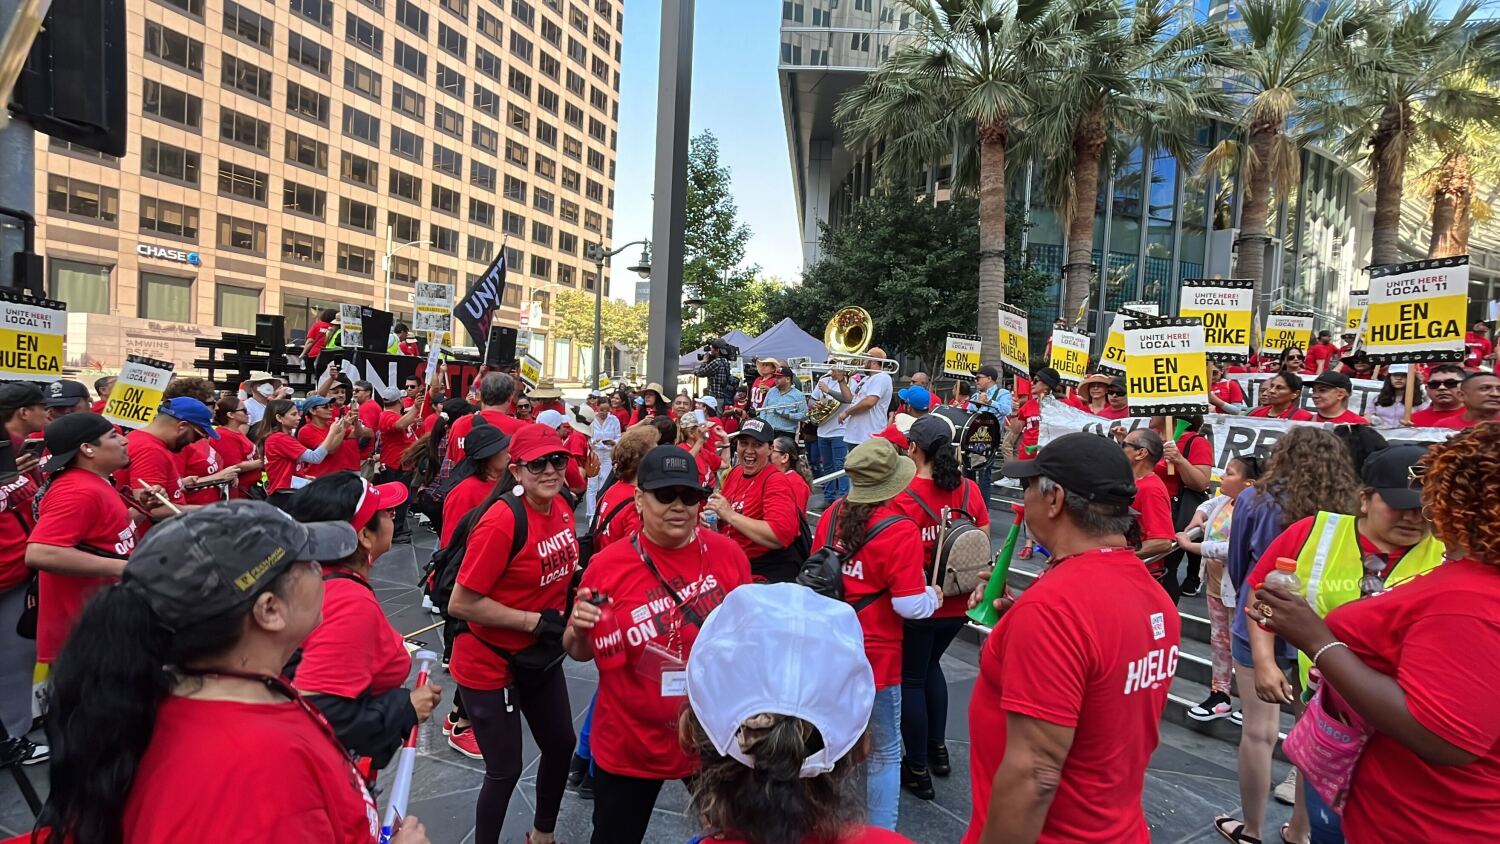 L.A.'s striking hotel workers are being roughed up by employers' security, union says